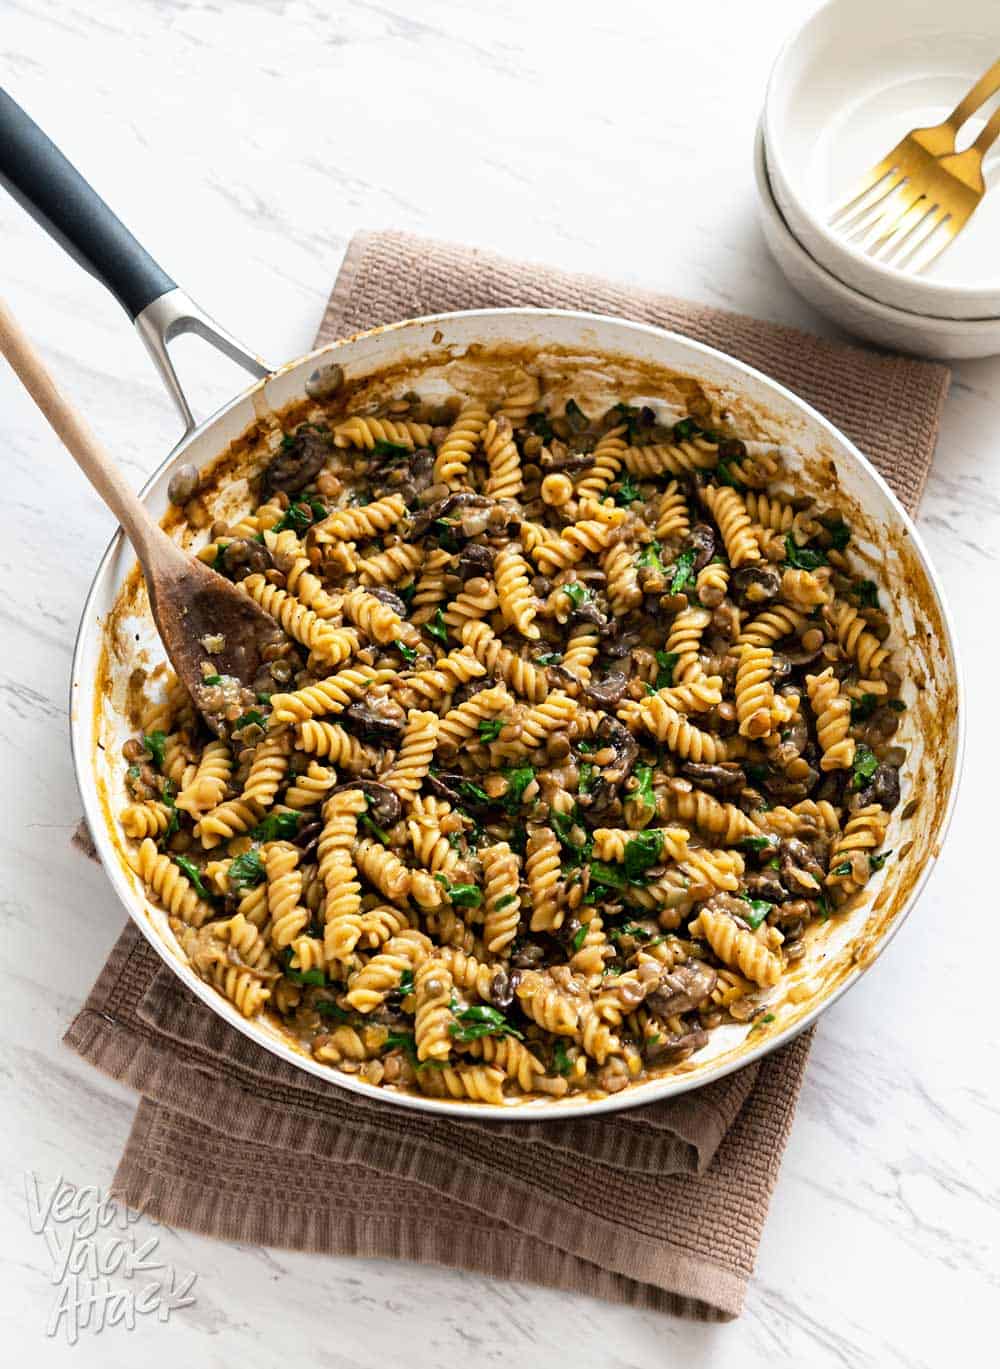 Image of one-pot lentil mushroom pasta in a large pan sitting on a towel